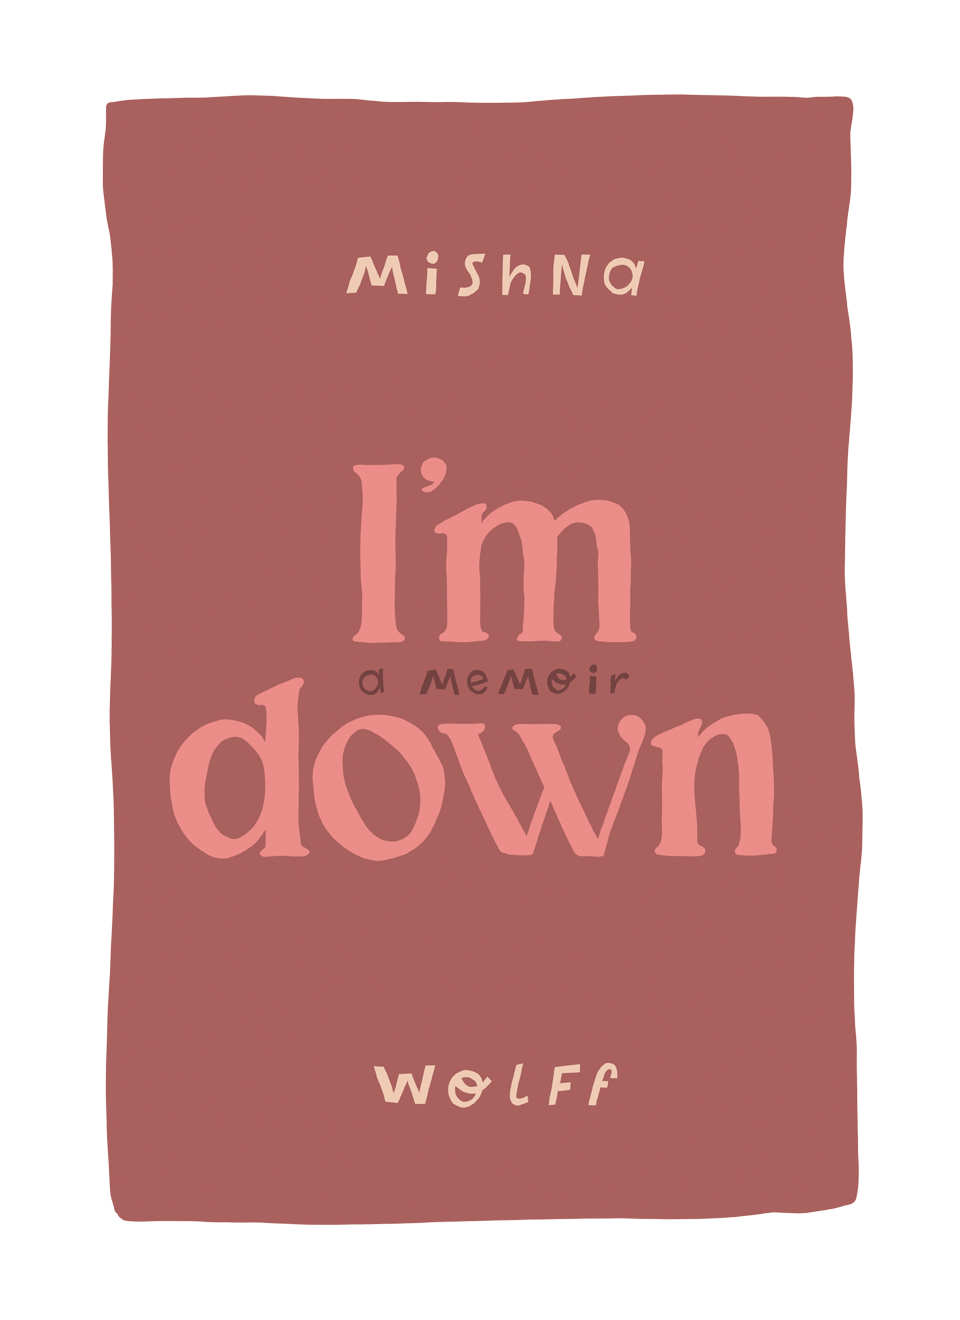 I'm Down by Mishna Wolff | illustrated by Alicia Carvalho